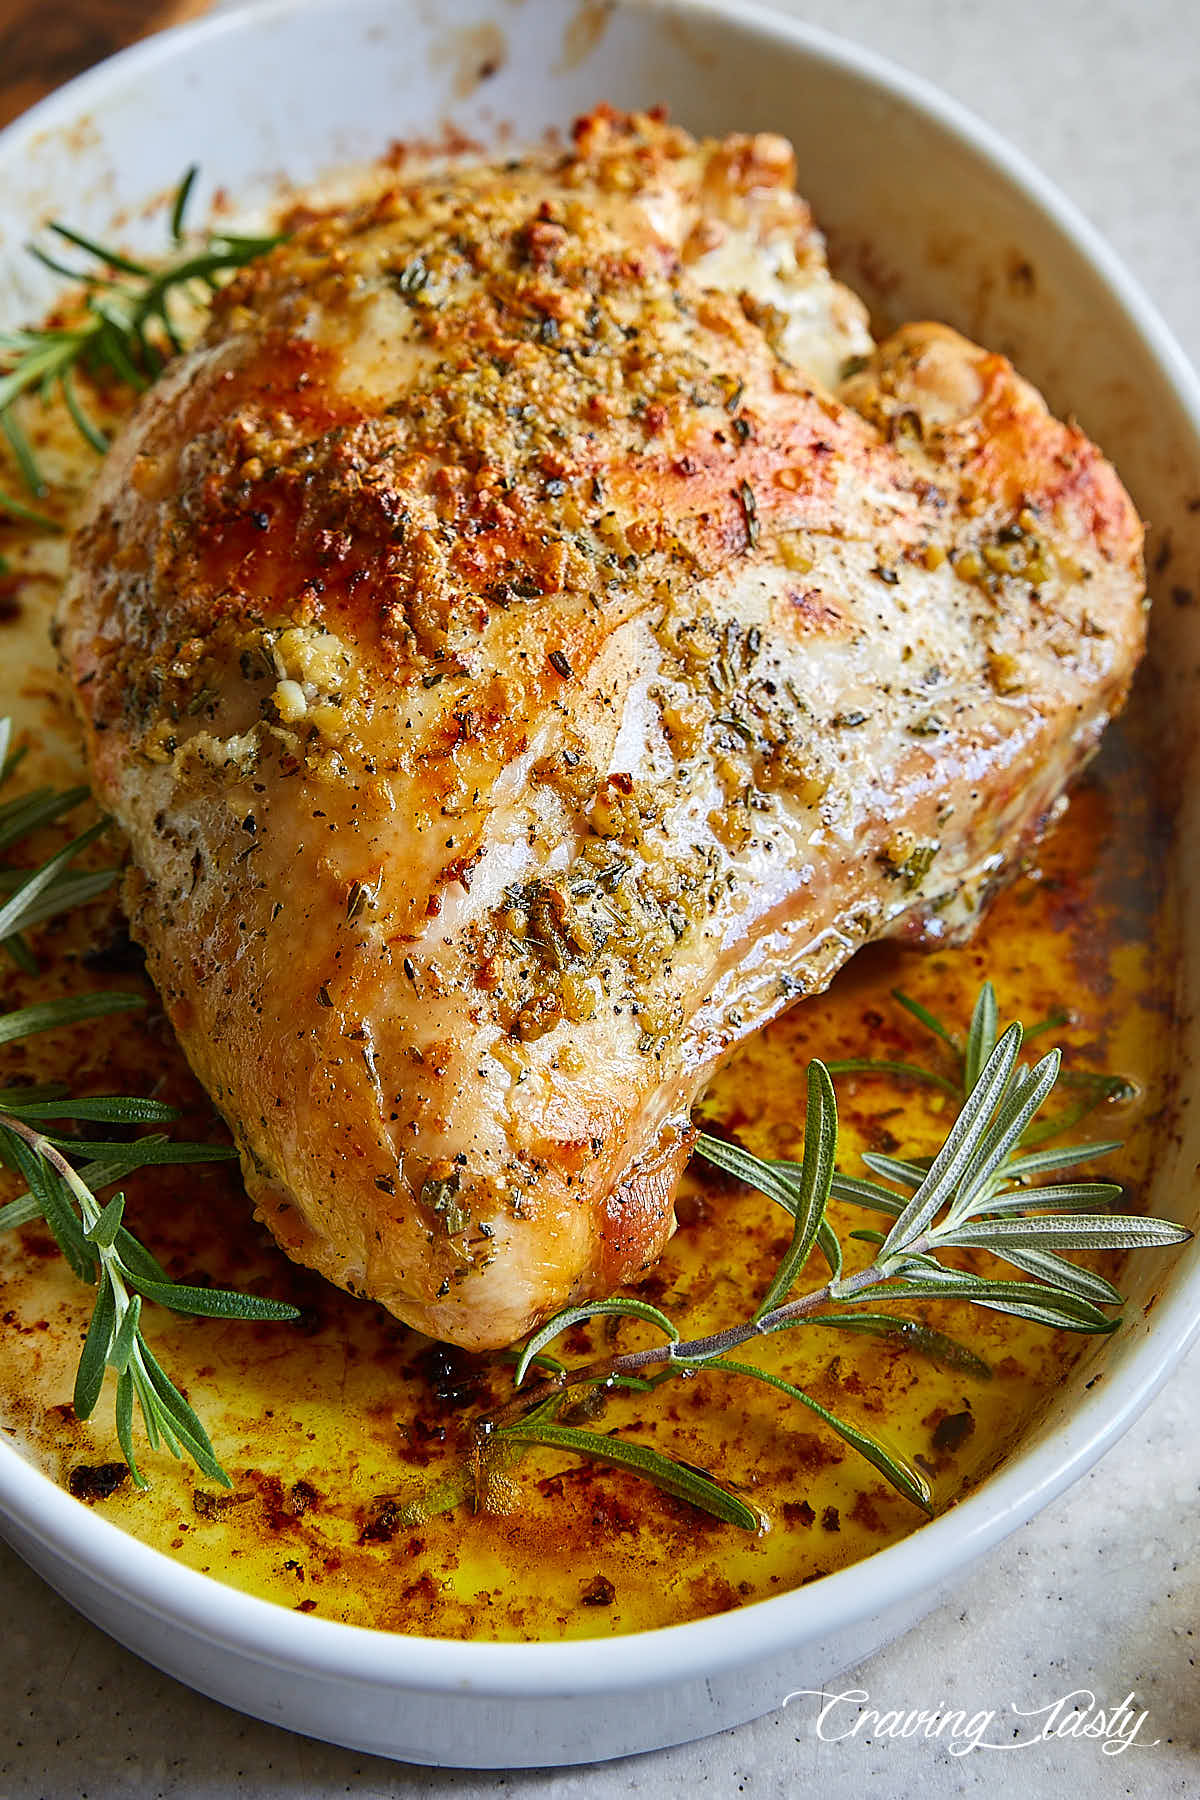 Well-browned turkey breast in a white baking dish garnished with fresh rosemary.